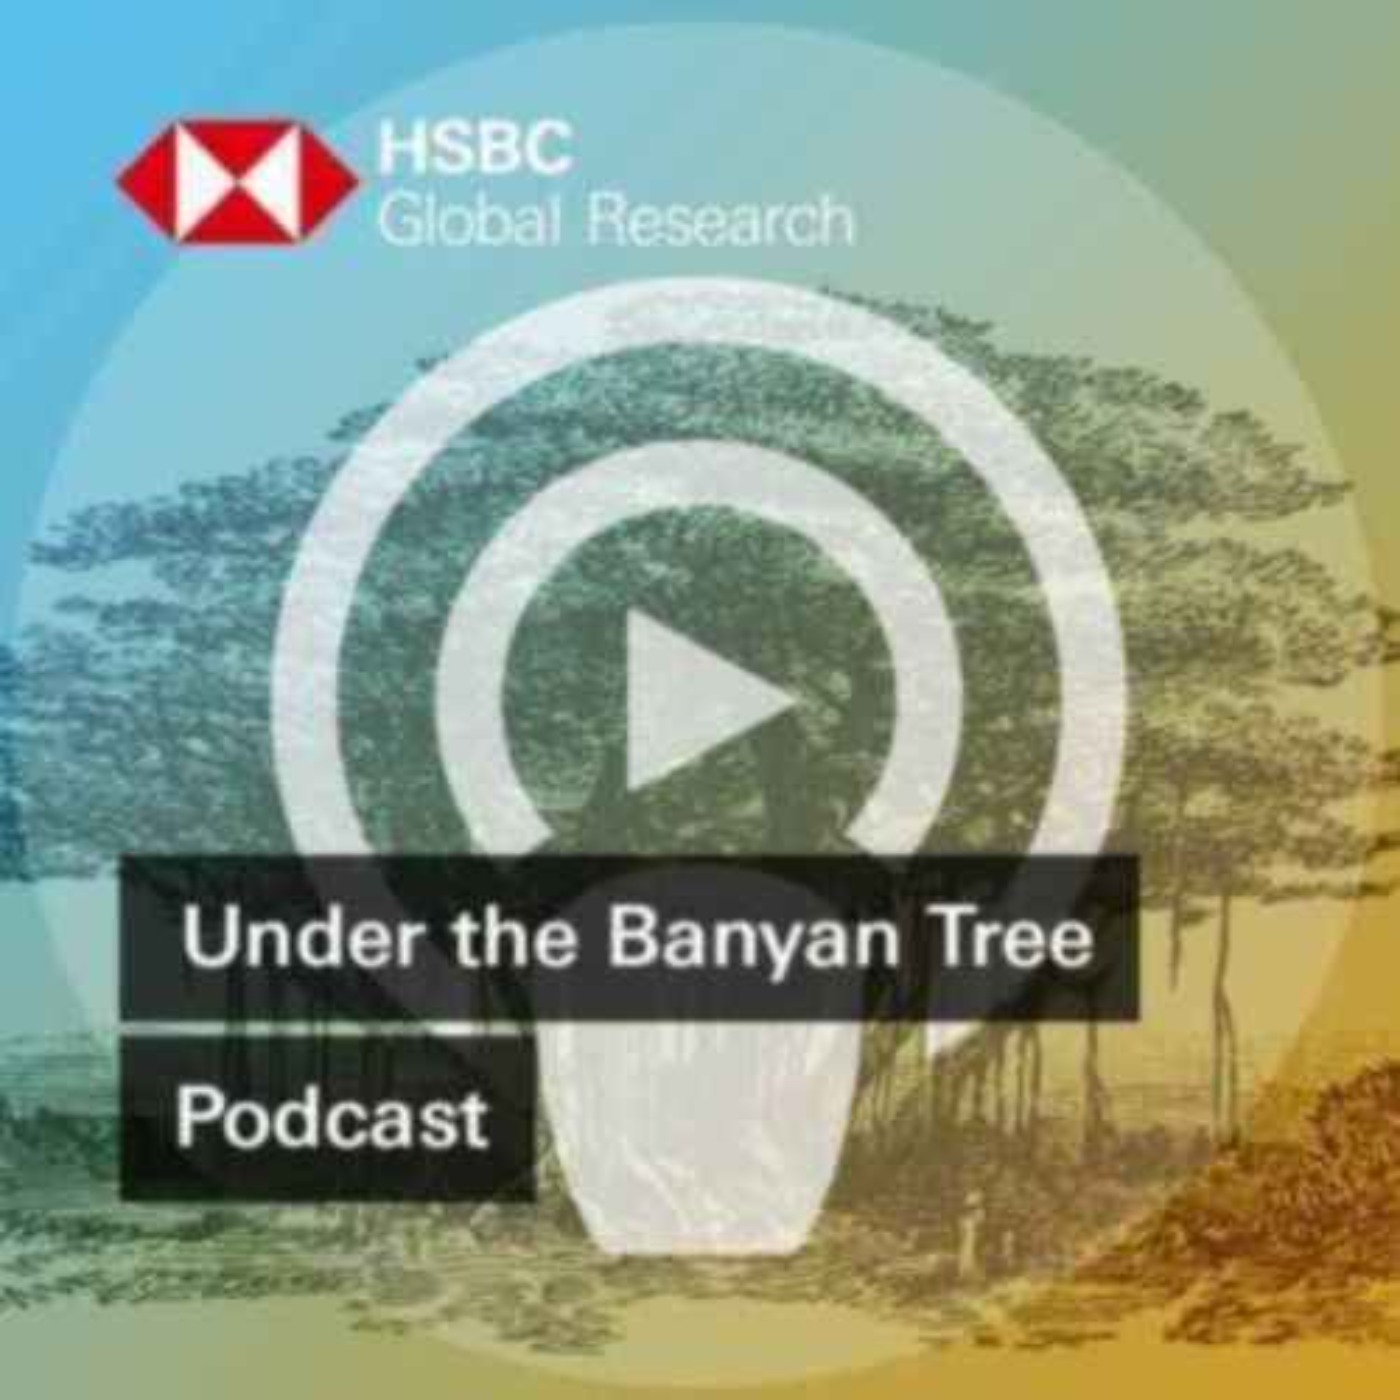 Under the Banyan Tree - Nvidia, Bitcoin and enough cement to turn Britain into a carpark